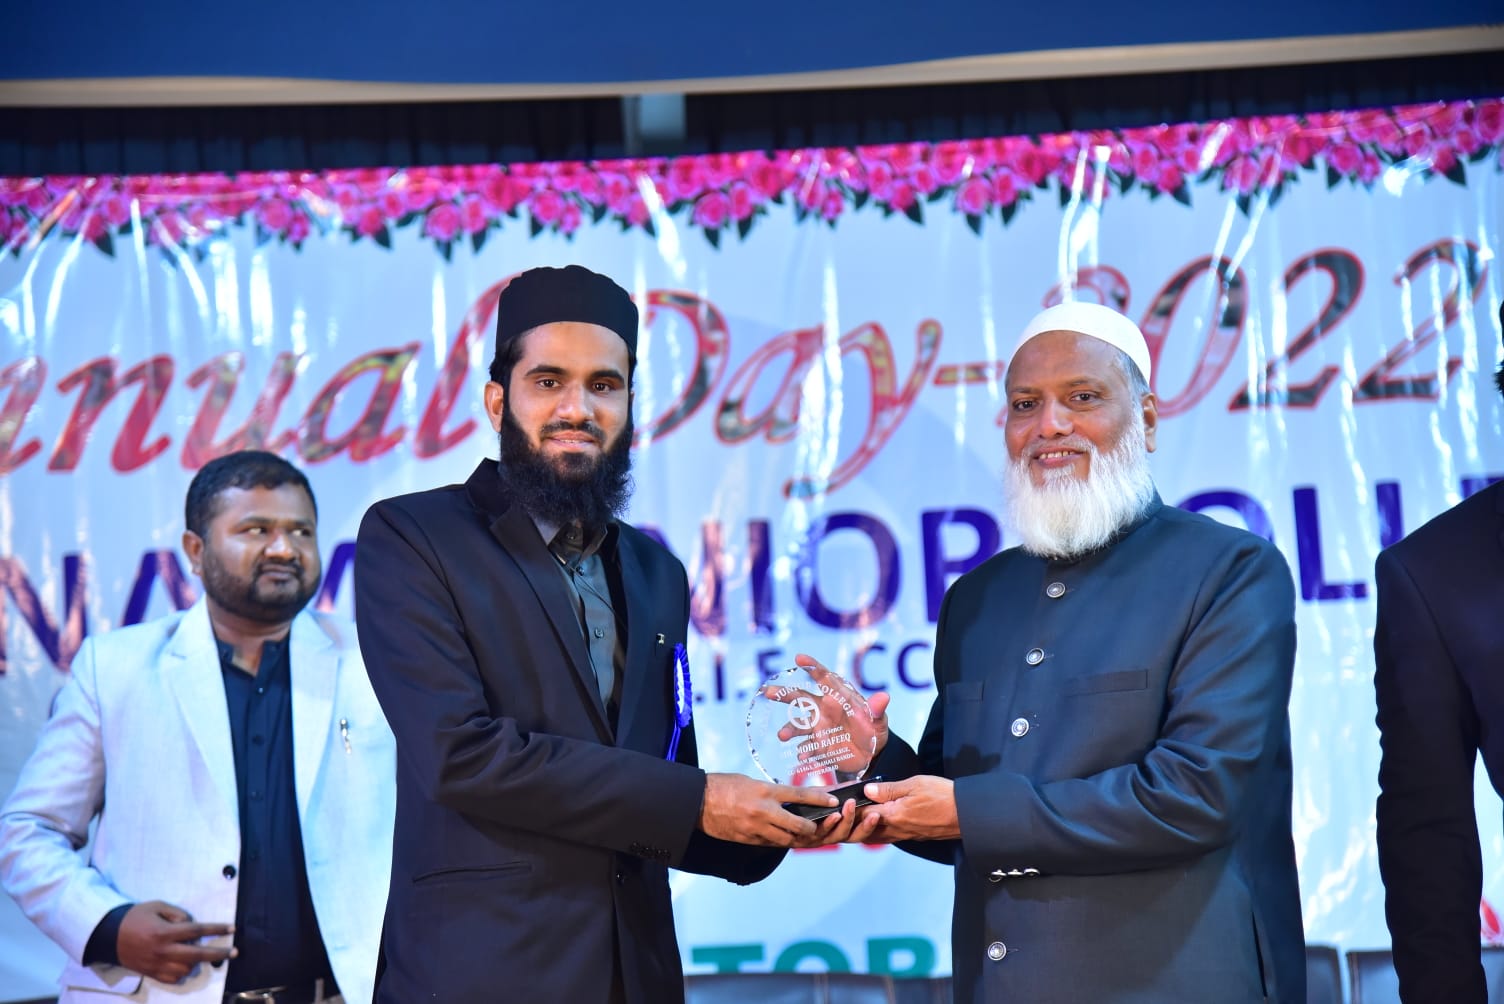 Gyanam junior college, faculty awards, inspiration, lecturer, annual day, 2022, awarded, motivational, higher education, gyanam academy, faculty